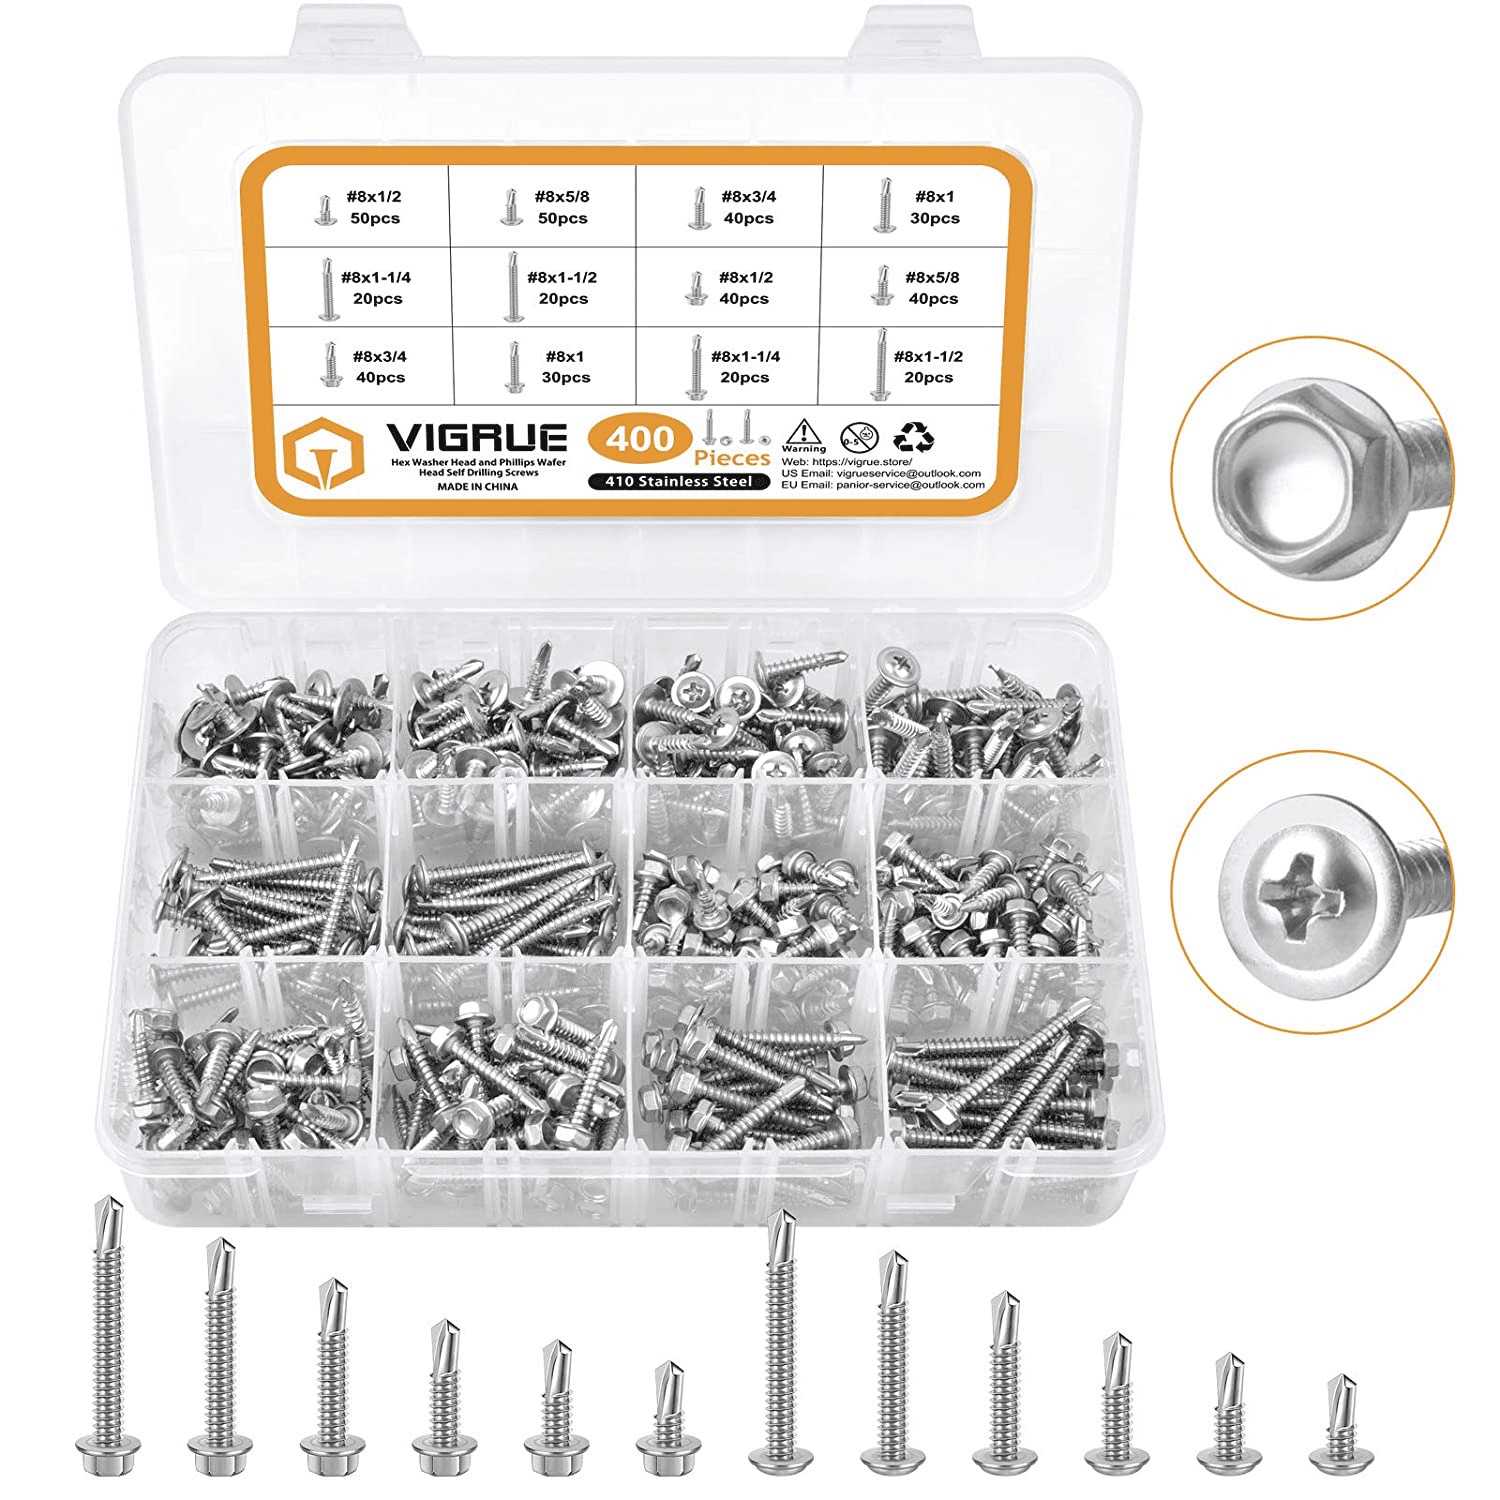 80 Hex Head Self Drilling Screw Set 305 SS Stainless Steel #12 x 2" 